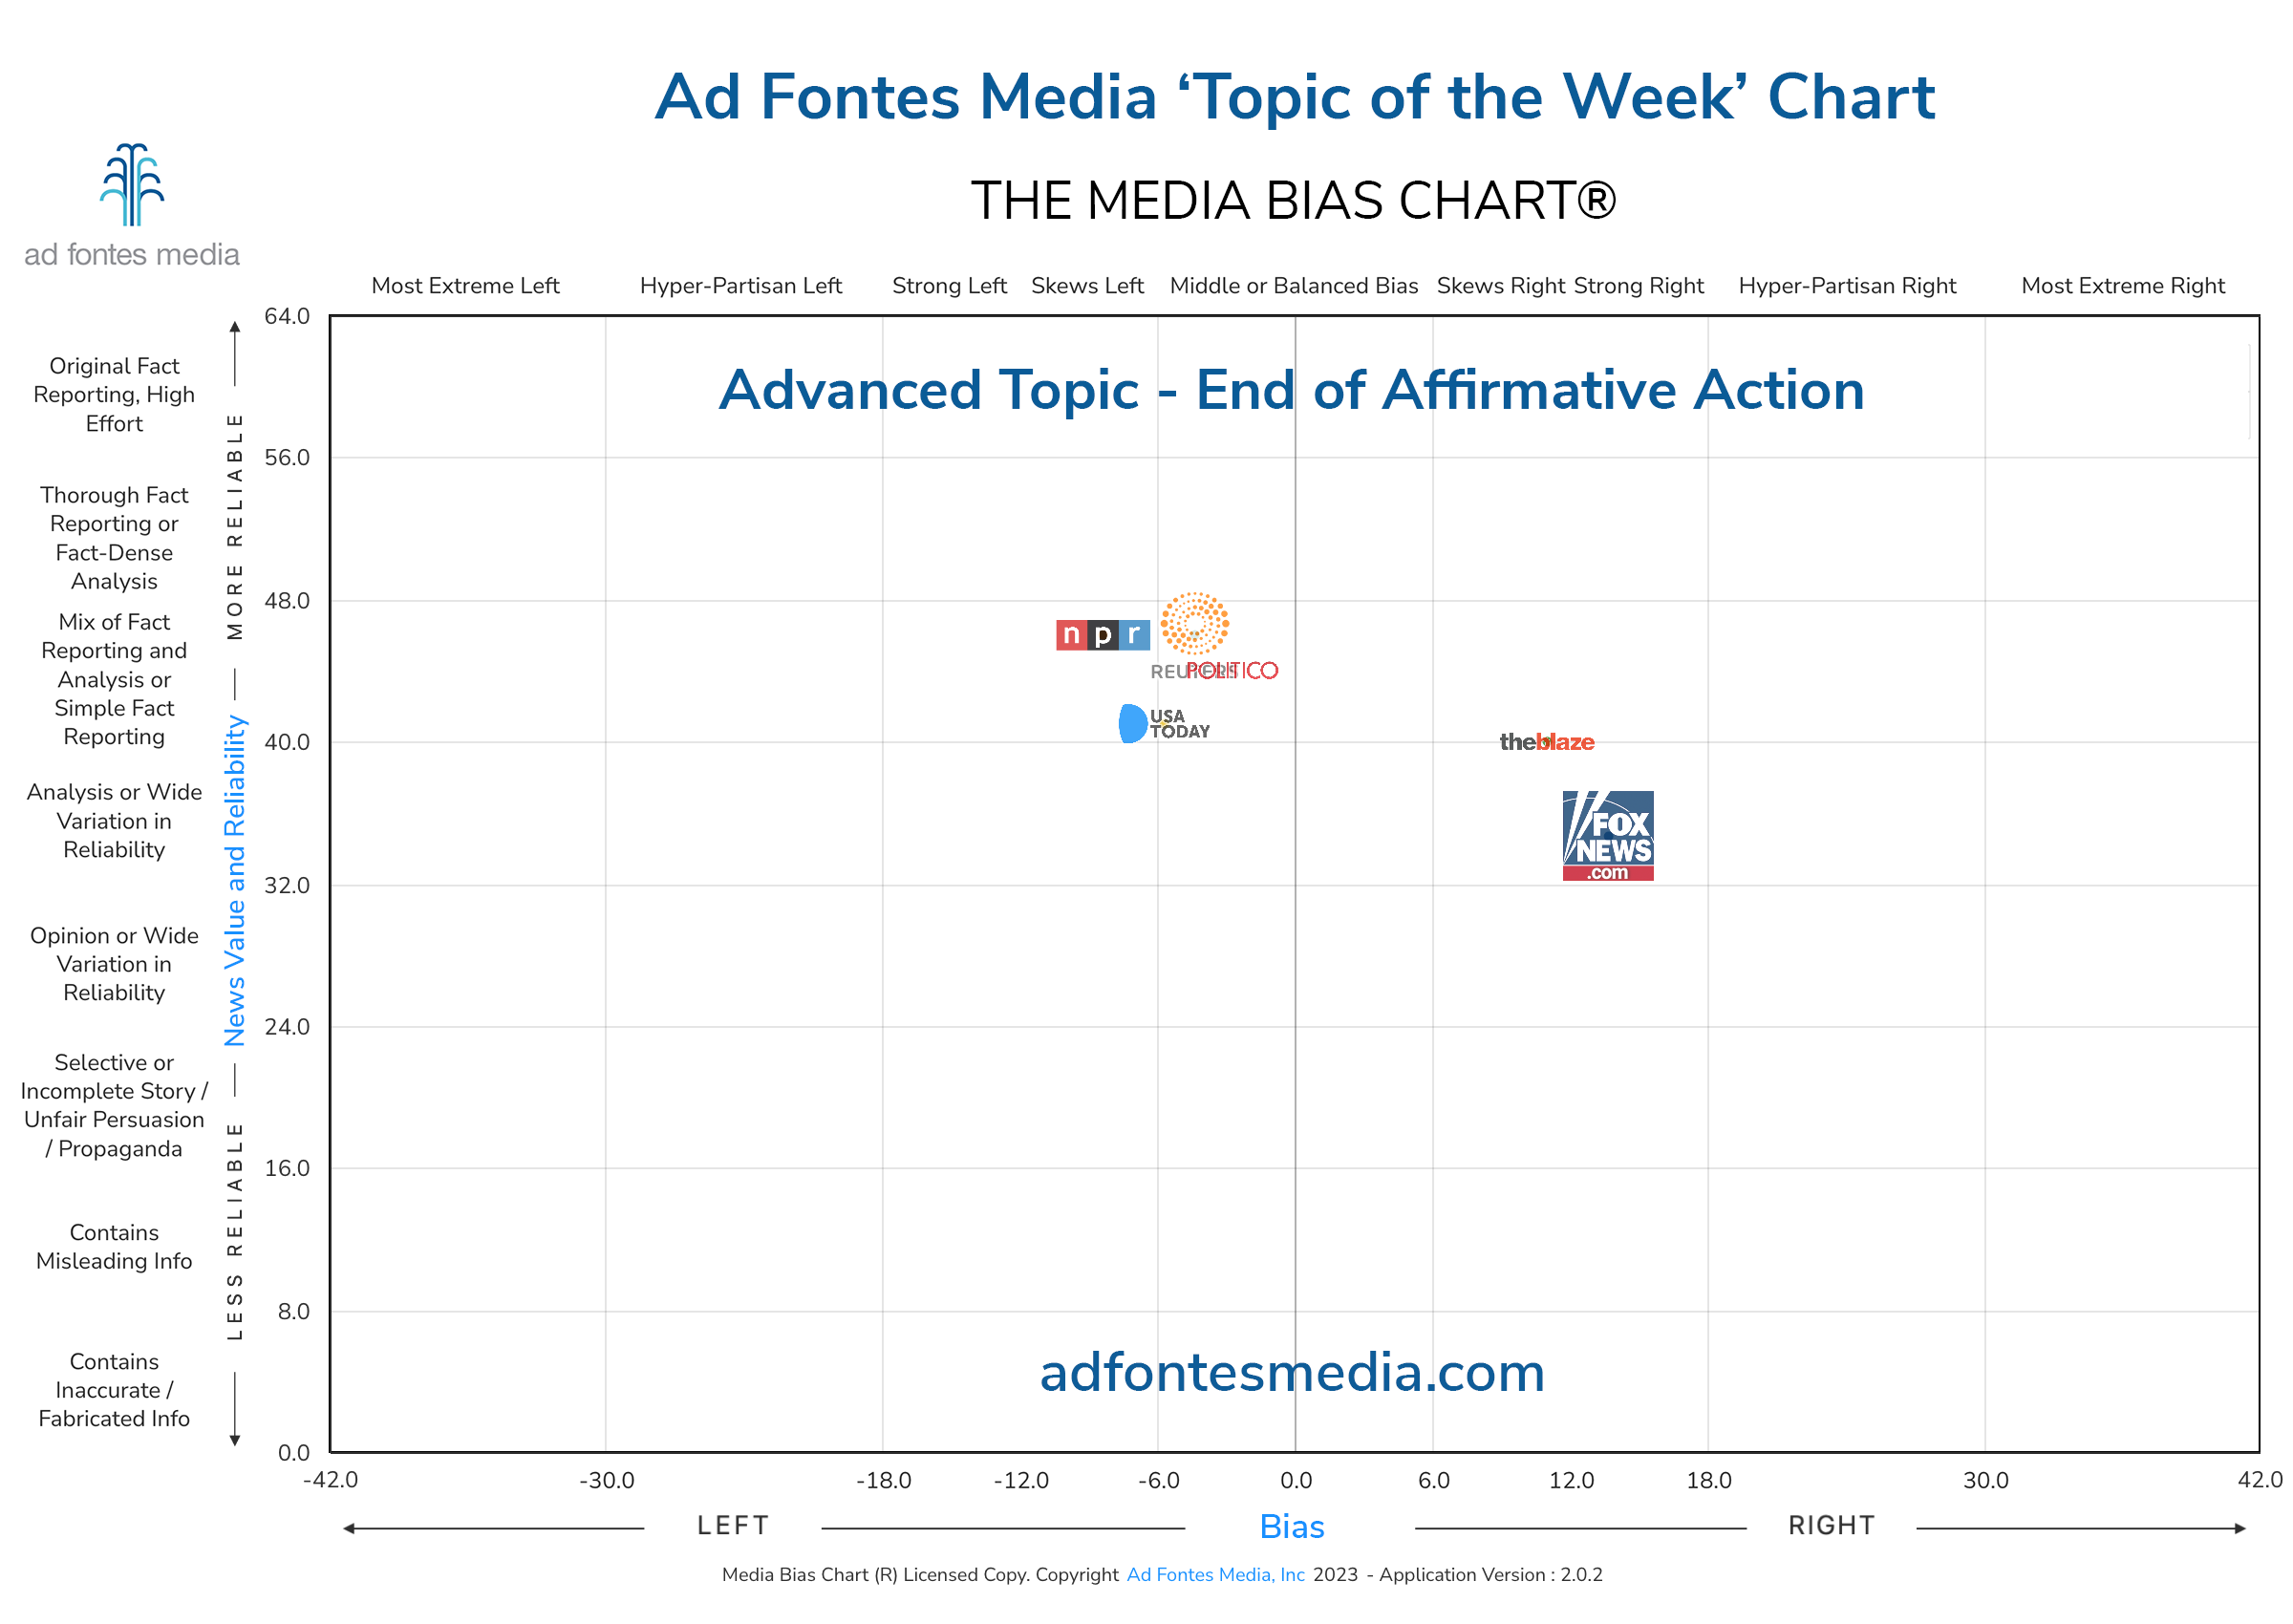 Scores of the End of Affirmative Action articles on the chart